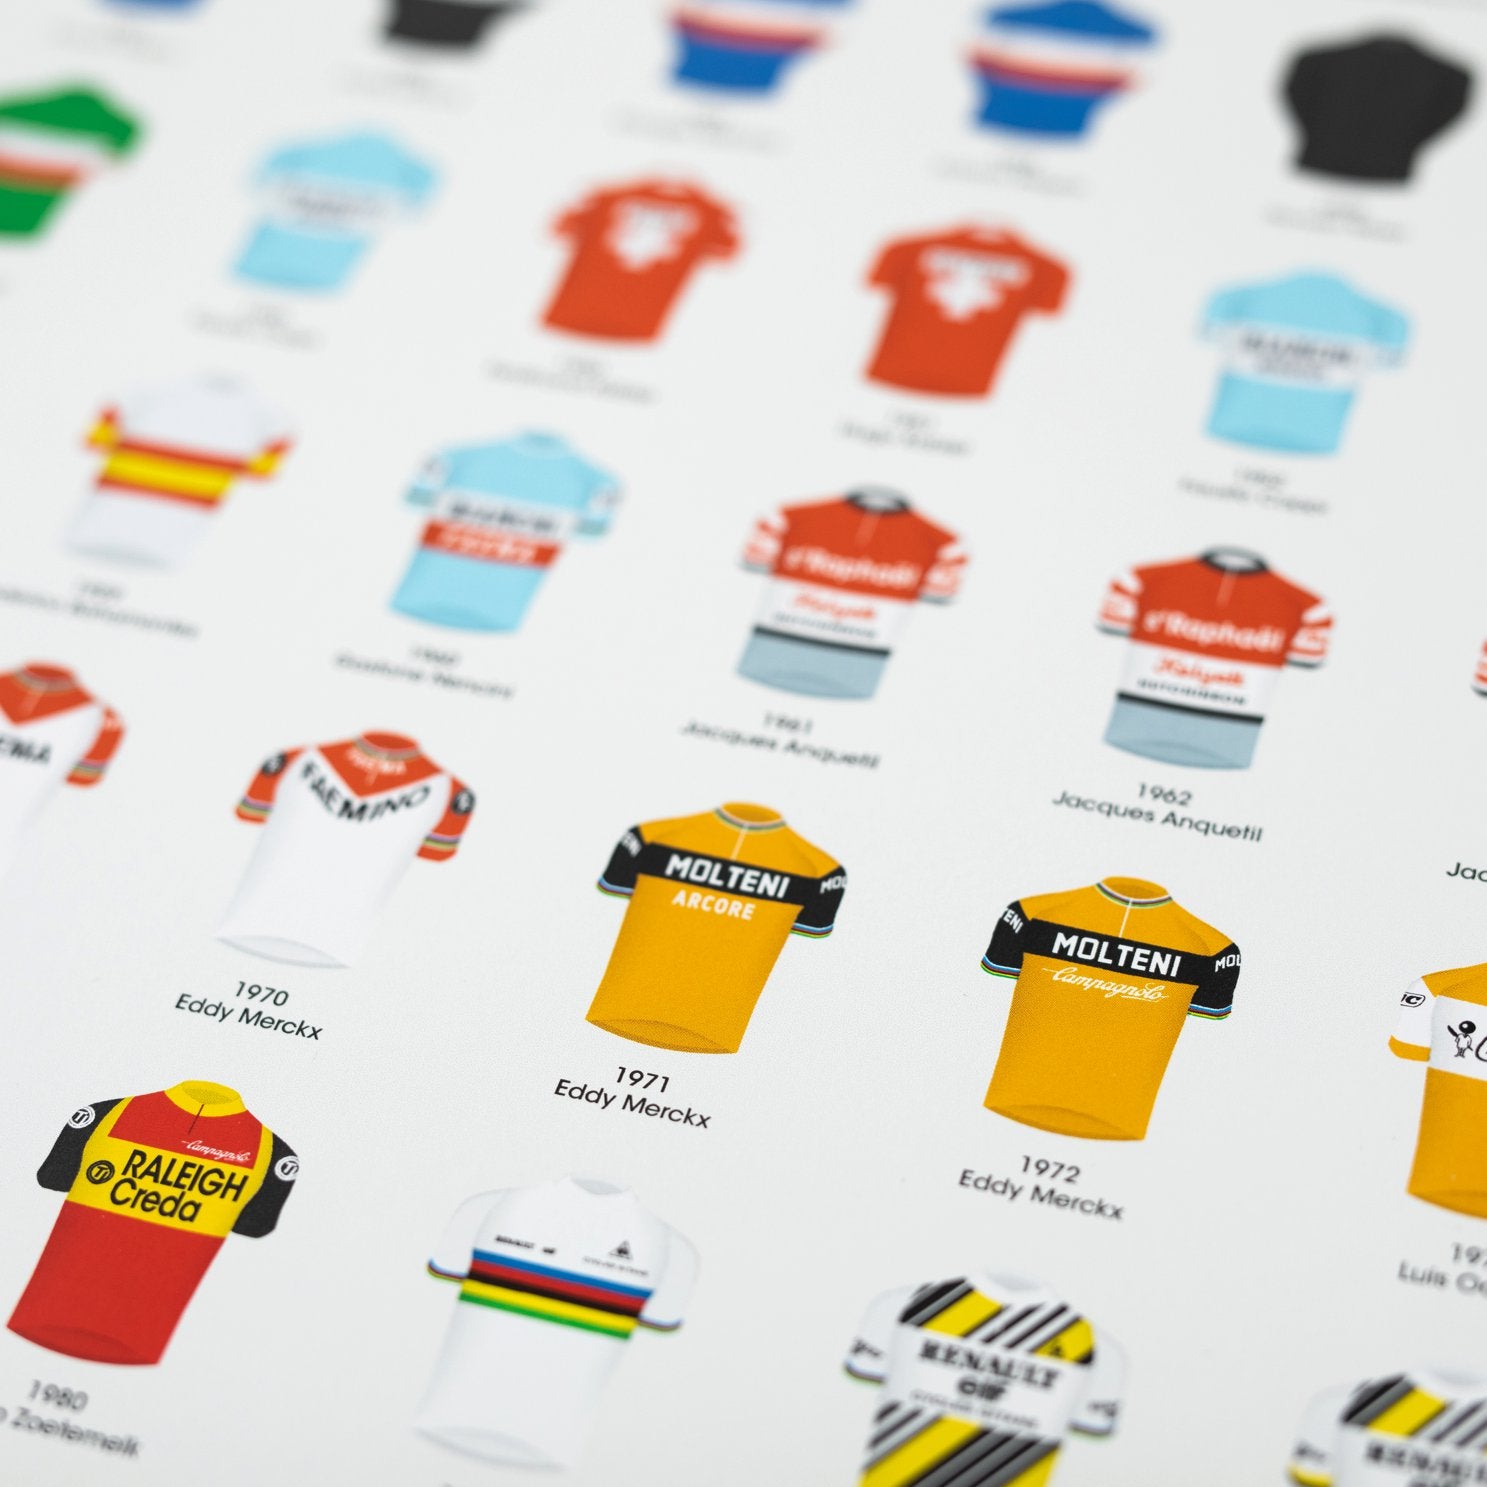 Tour de France Winners – Poster – The English Cyclist